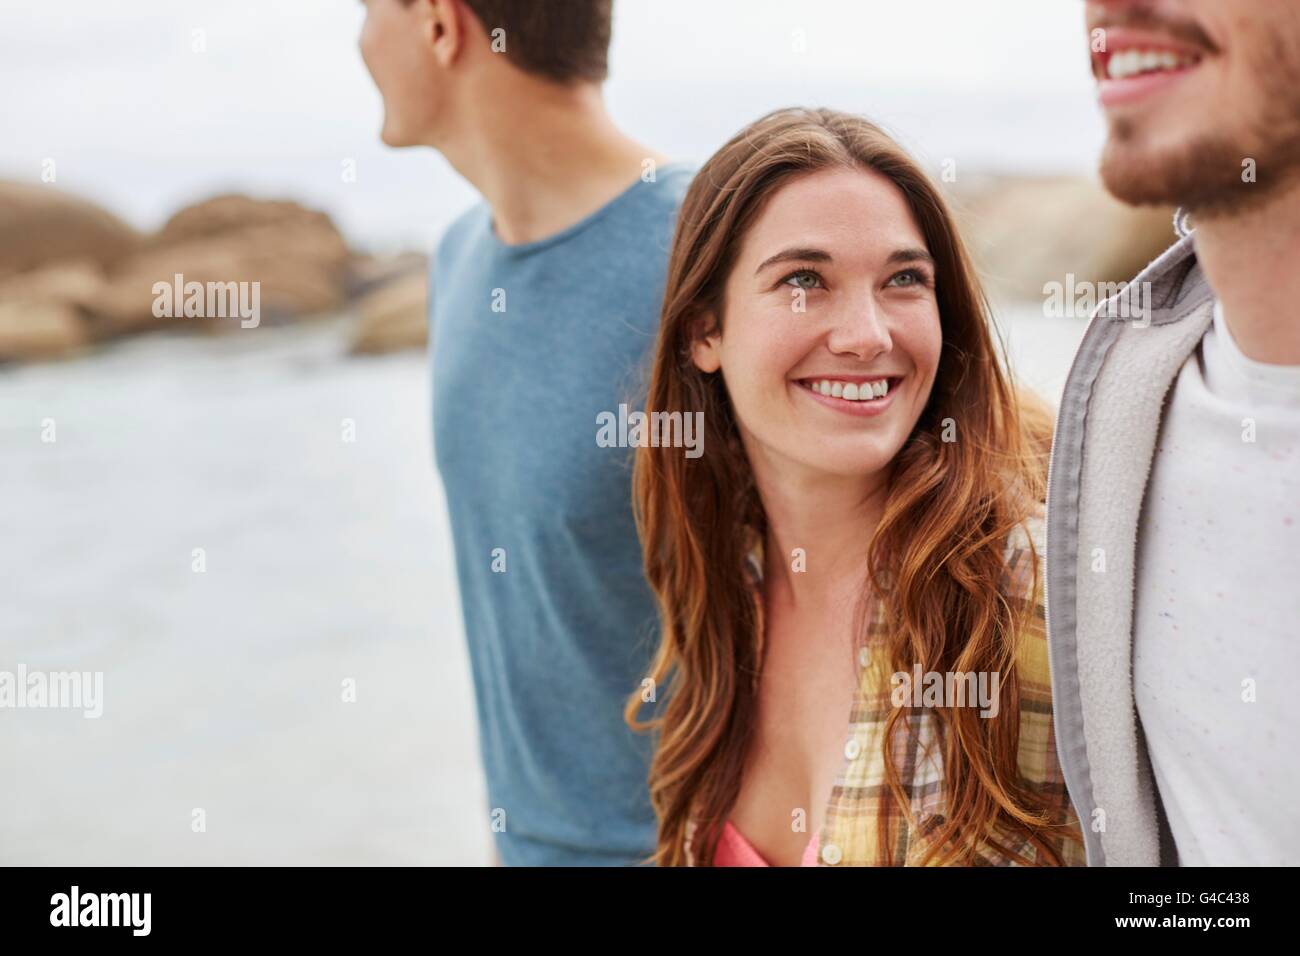 MODEL RELEASED. Young woman with brown hair, smiling. Stock Photo